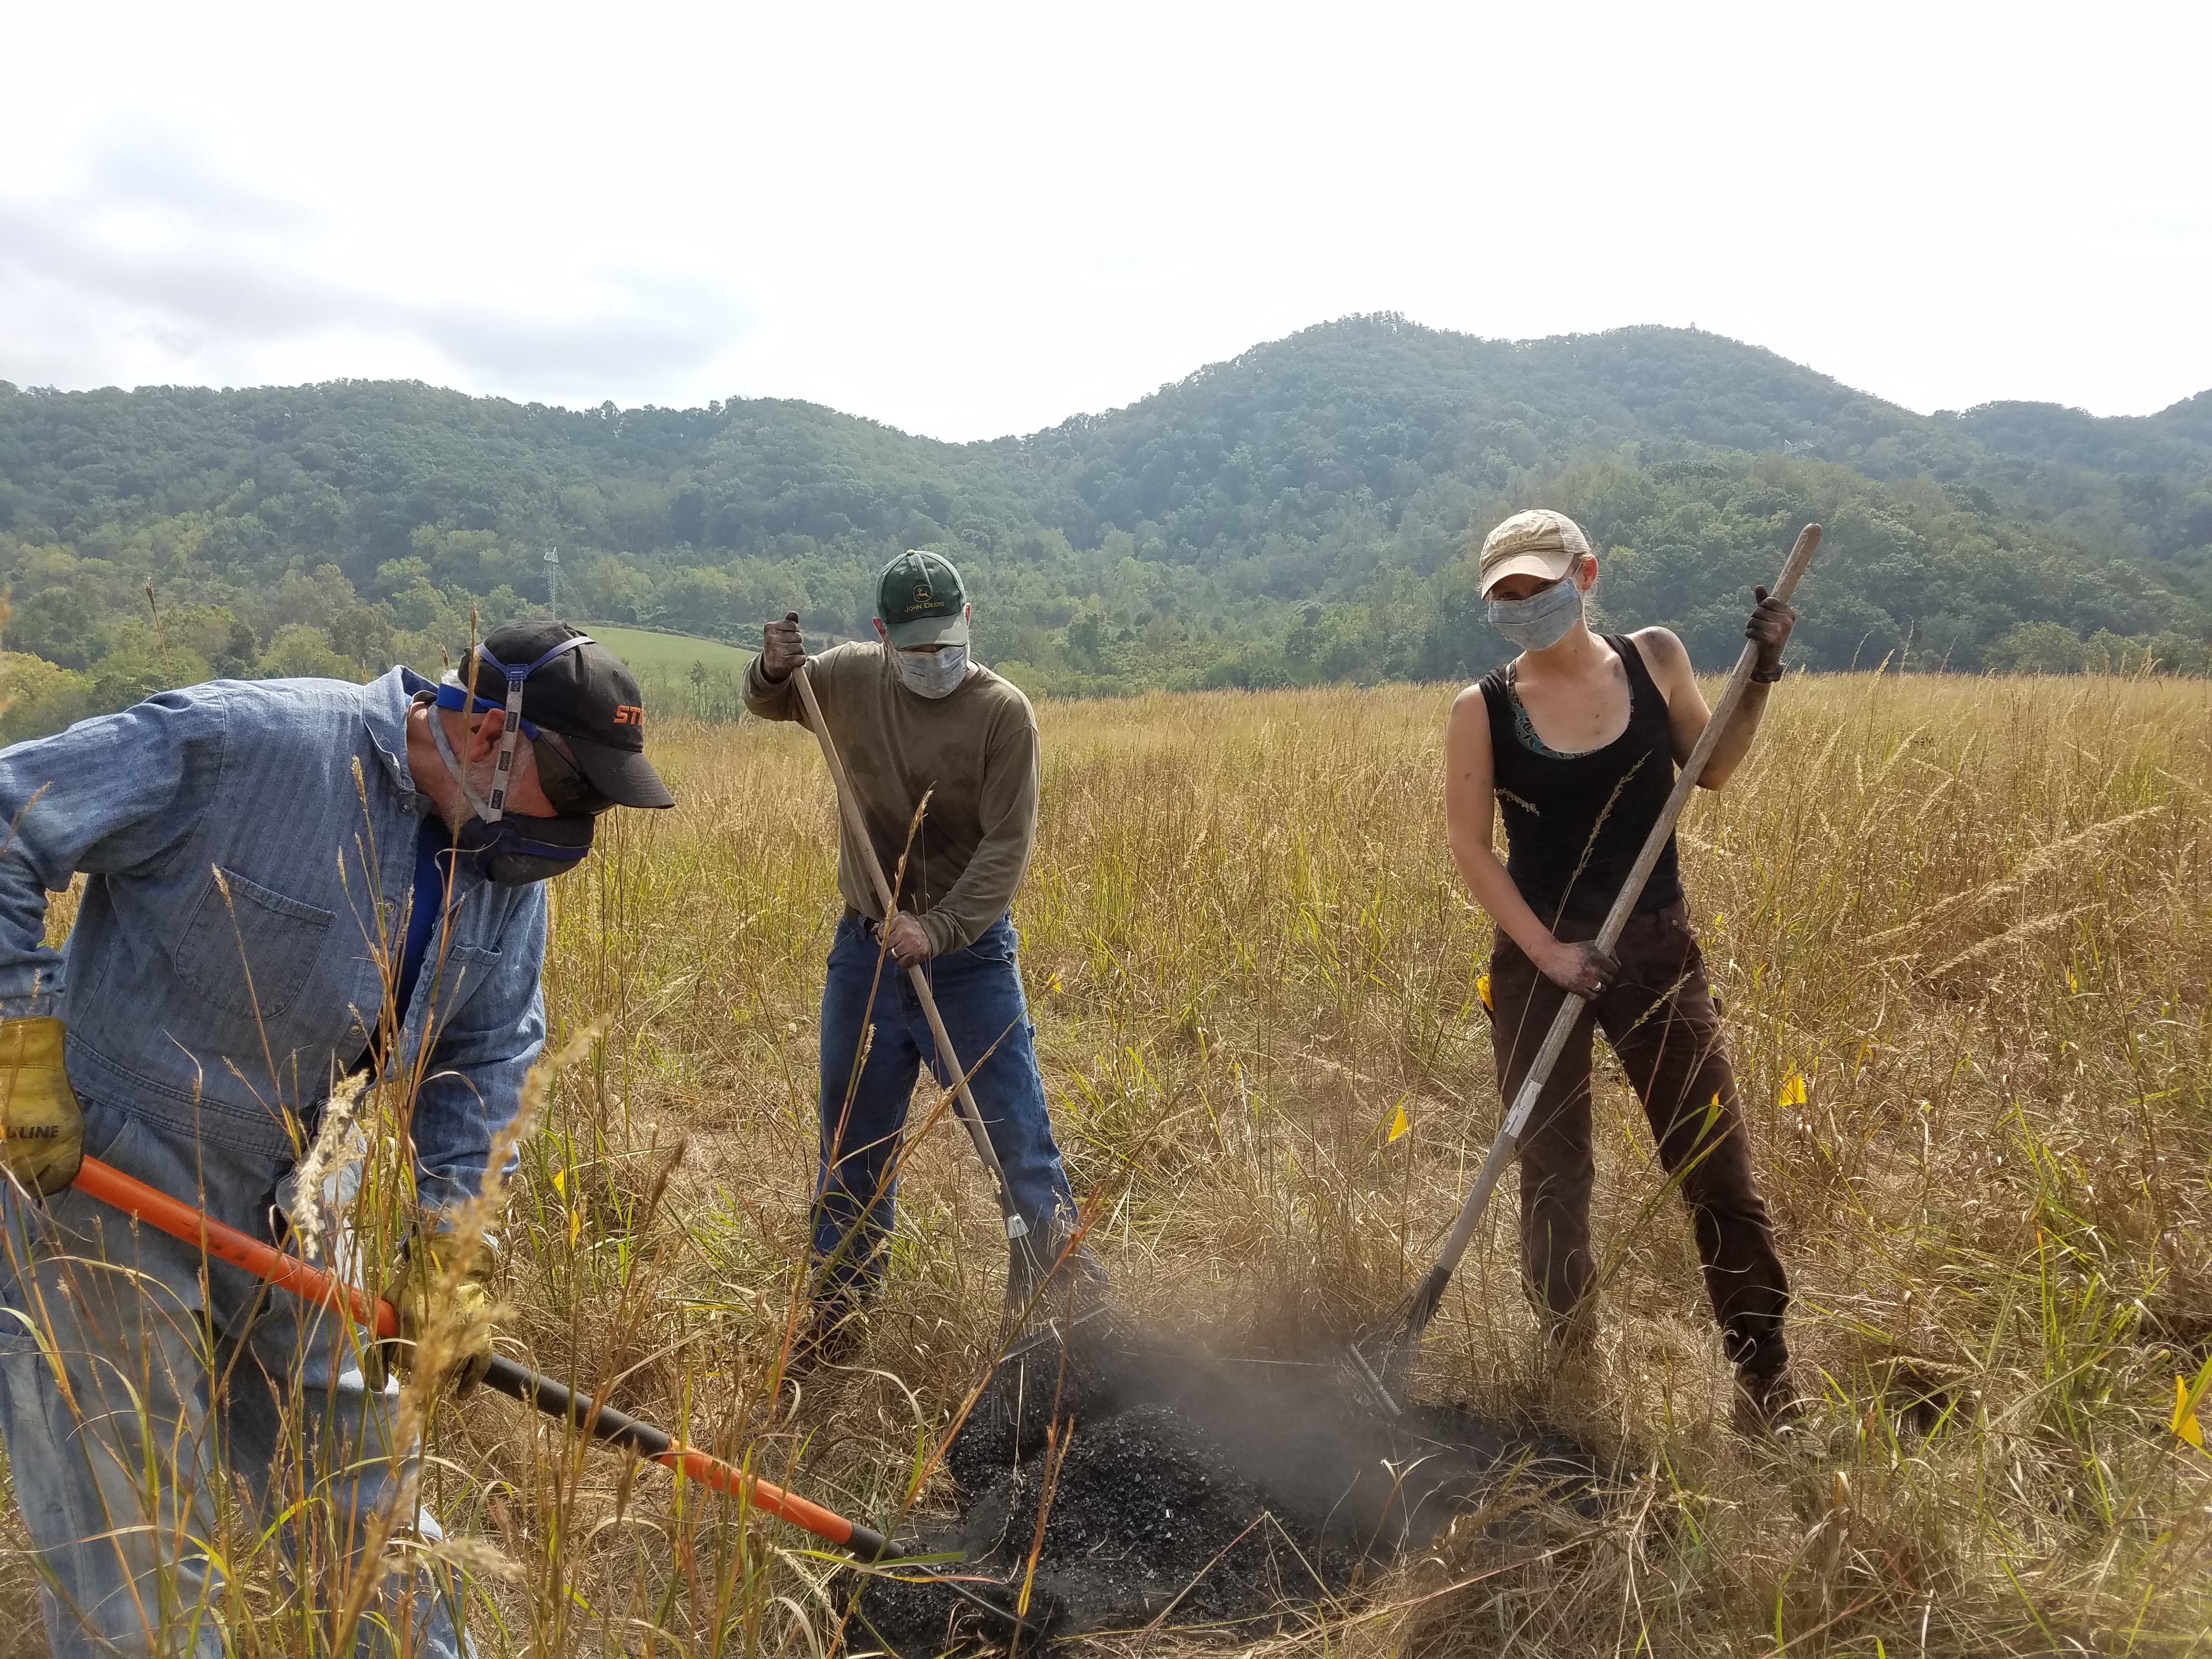 This photo shows two men and a woman, all light-skinned and clad in ball caps, shirts, pants, and face masks, shoveling or raking a pile of black charcoal in the middle of a meadow with green tree-covered mountains in the background.